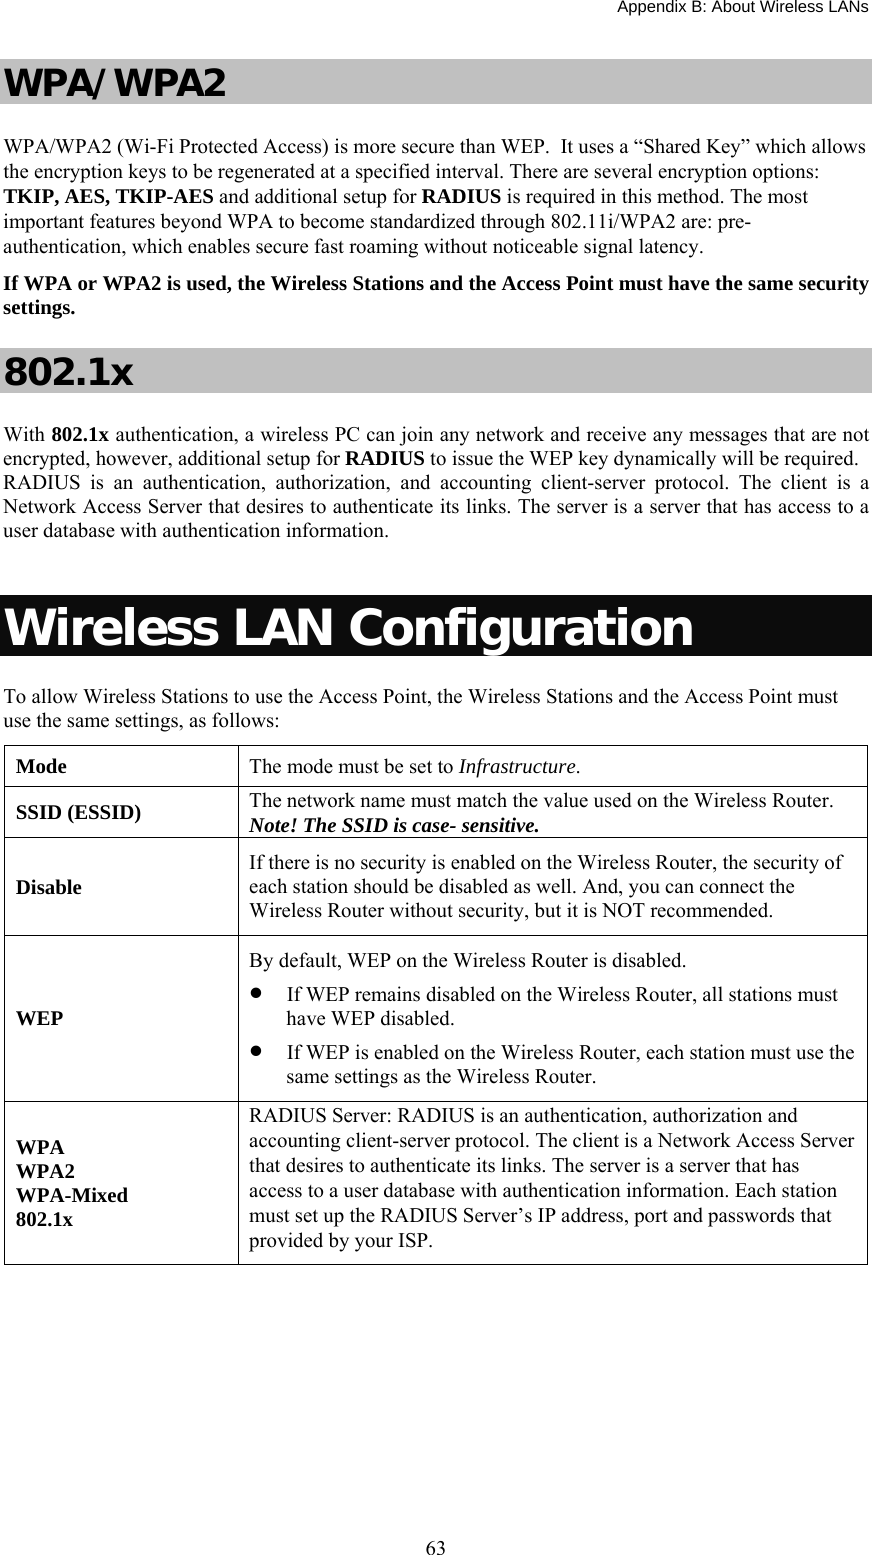 Appendix B: About Wireless LANs  63WPA/WPA2 WPA/WPA2 (Wi-Fi Protected Access) is more secure than WEP.  It uses a “Shared Key” which allows the encryption keys to be regenerated at a specified interval. There are several encryption options: TKIP, AES, TKIP-AES and additional setup for RADIUS is required in this method. The most important features beyond WPA to become standardized through 802.11i/WPA2 are: pre-authentication, which enables secure fast roaming without noticeable signal latency.  If WPA or WPA2 is used, the Wireless Stations and the Access Point must have the same security settings. 802.1x With 802.1x authentication, a wireless PC can join any network and receive any messages that are not encrypted, however, additional setup for RADIUS to issue the WEP key dynamically will be required. RADIUS is an authentication, authorization, and accounting client-server protocol. The client is a Network Access Server that desires to authenticate its links. The server is a server that has access to a user database with authentication information.  Wireless LAN Configuration To allow Wireless Stations to use the Access Point, the Wireless Stations and the Access Point must use the same settings, as follows: Mode  The mode must be set to Infrastructure. SSID (ESSID)  The network name must match the value used on the Wireless Router. Note! The SSID is case- sensitive. Disable  If there is no security is enabled on the Wireless Router, the security of each station should be disabled as well. And, you can connect the Wireless Router without security, but it is NOT recommended. WEP  By default, WEP on the Wireless Router is disabled. • If WEP remains disabled on the Wireless Router, all stations must have WEP disabled. • If WEP is enabled on the Wireless Router, each station must use the same settings as the Wireless Router. WPA WPA2 WPA-Mixed 802.1x RADIUS Server: RADIUS is an authentication, authorization and accounting client-server protocol. The client is a Network Access Server that desires to authenticate its links. The server is a server that has access to a user database with authentication information. Each station must set up the RADIUS Server’s IP address, port and passwords that provided by your ISP.    